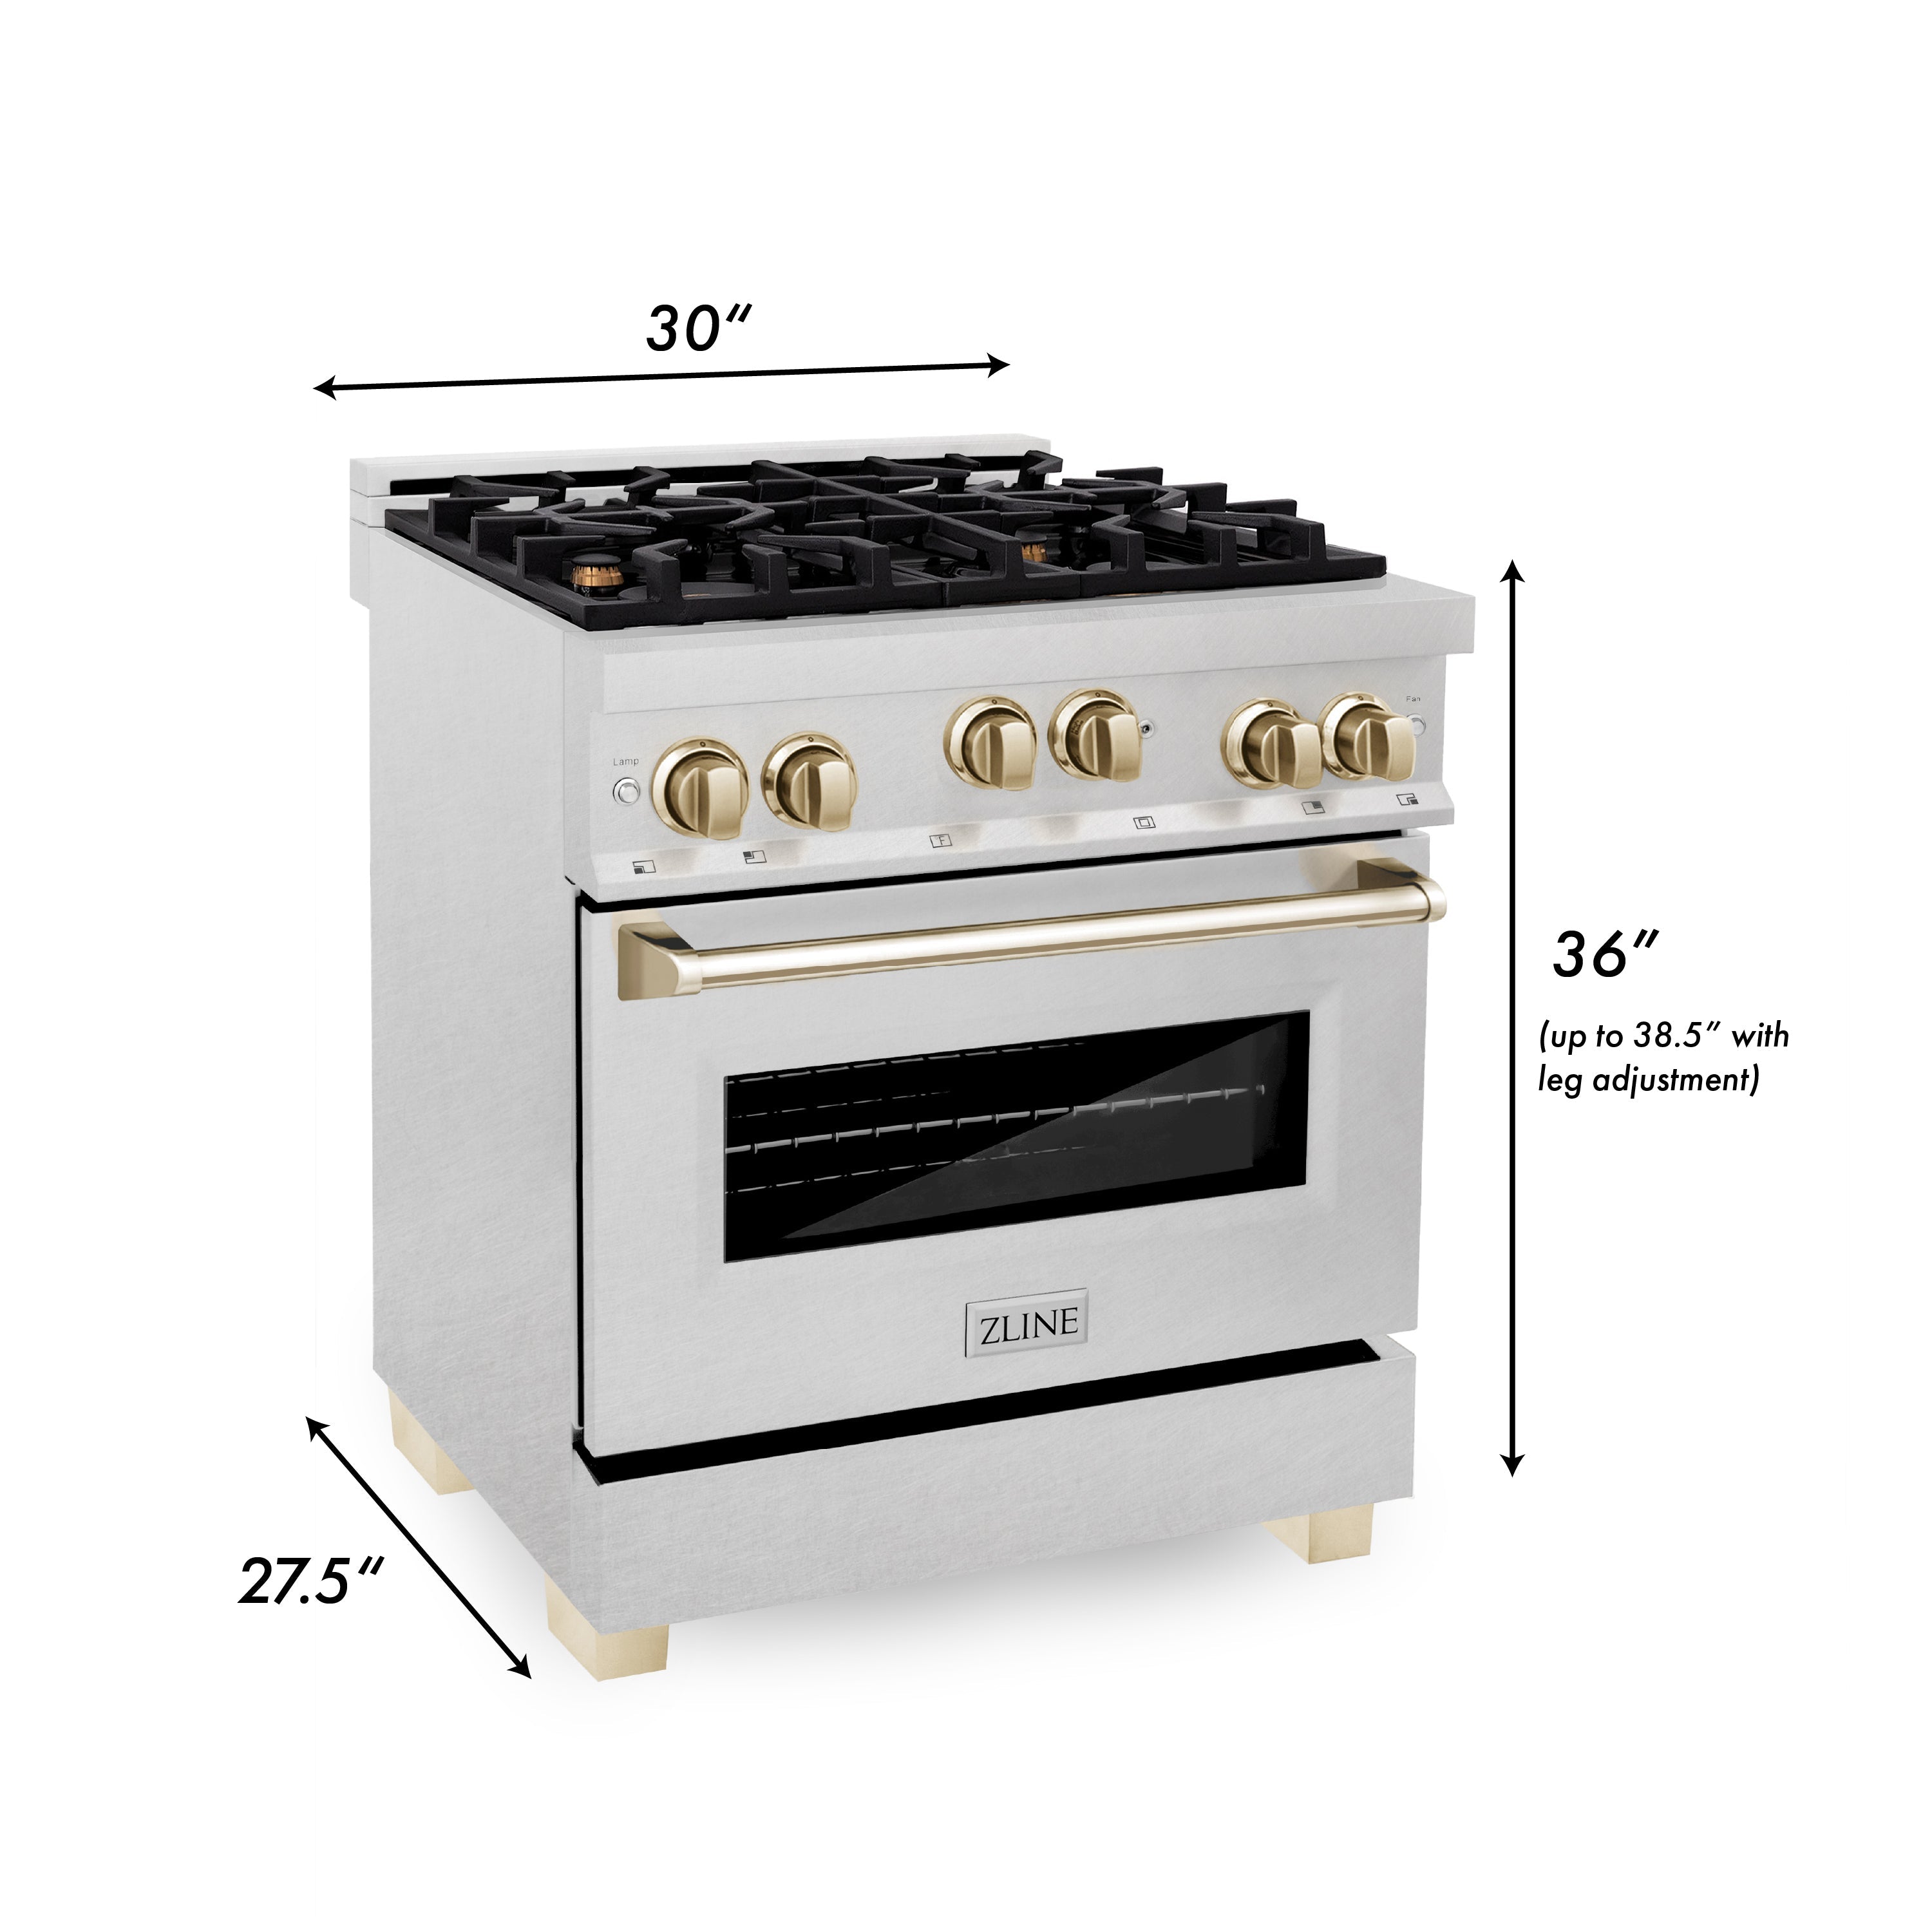 ZLINE Autograph Edition 30 in. 4.0 cu. ft. Range with Gas Stove and Gas Oven in DuraSnow Stainless Steel (RGSZ-SN-30)